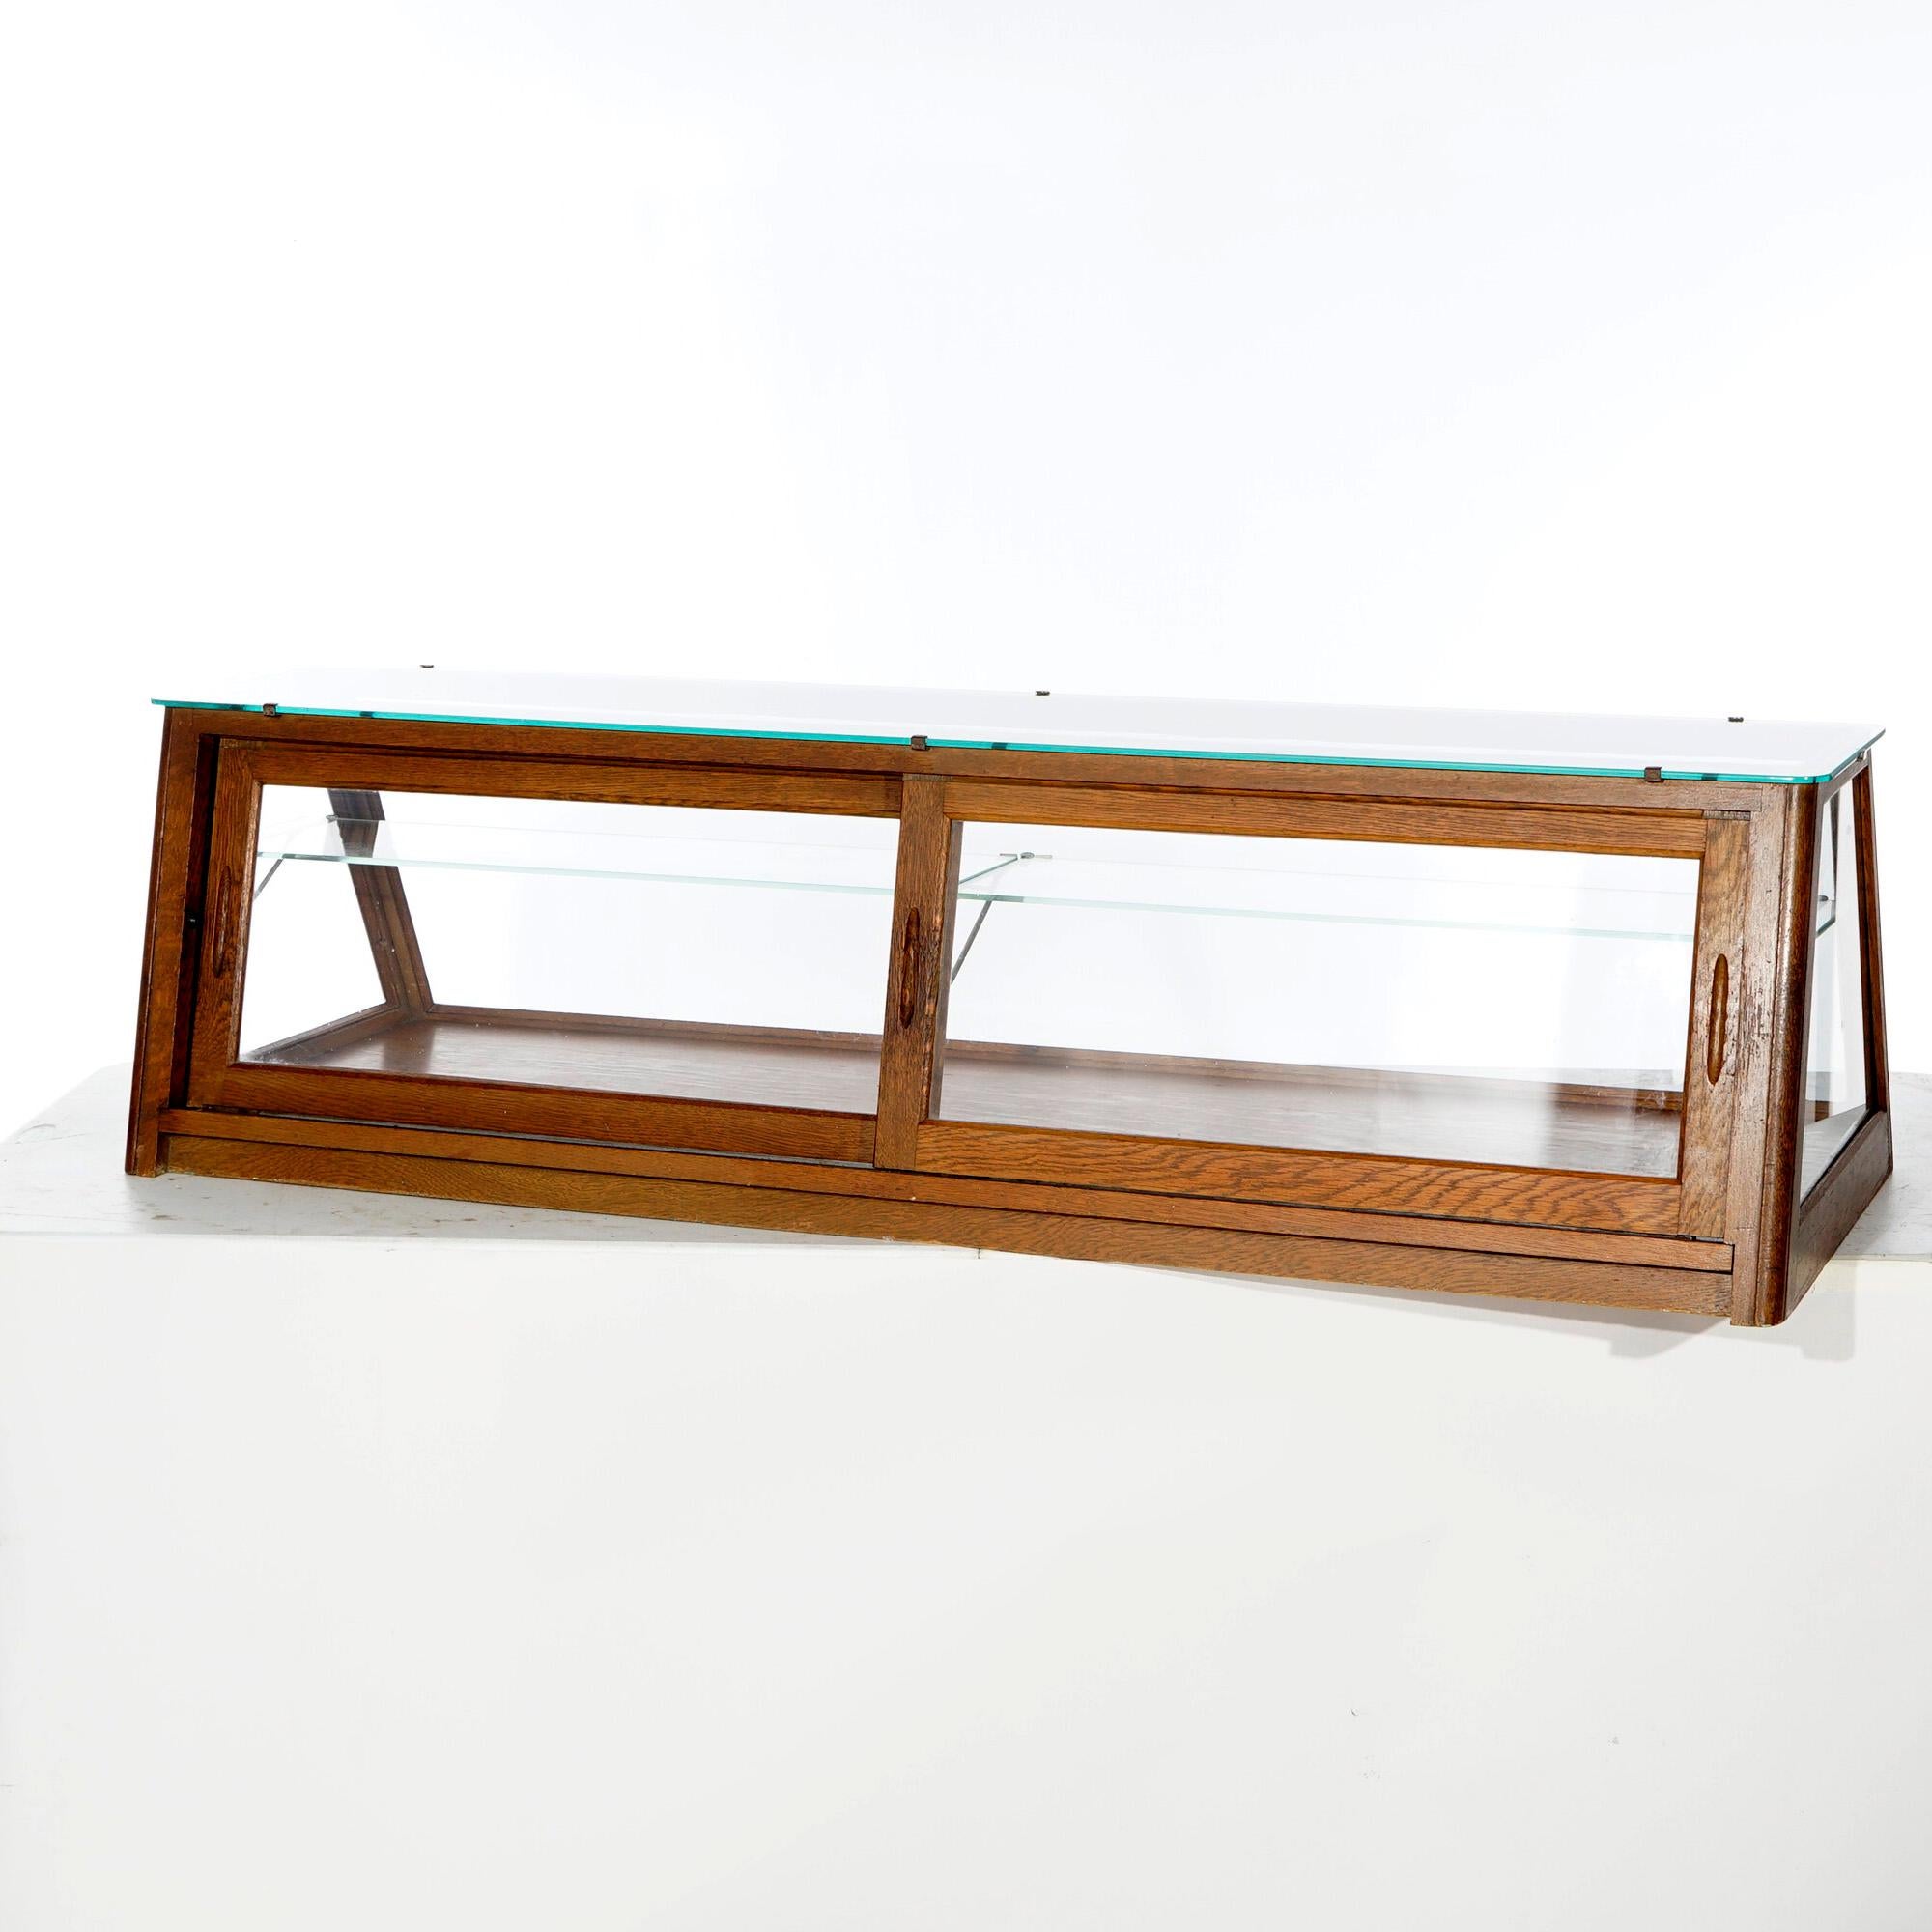 American Antique Oak & Glass Columbus Showcase Table Top Country Store Display Case, 1920